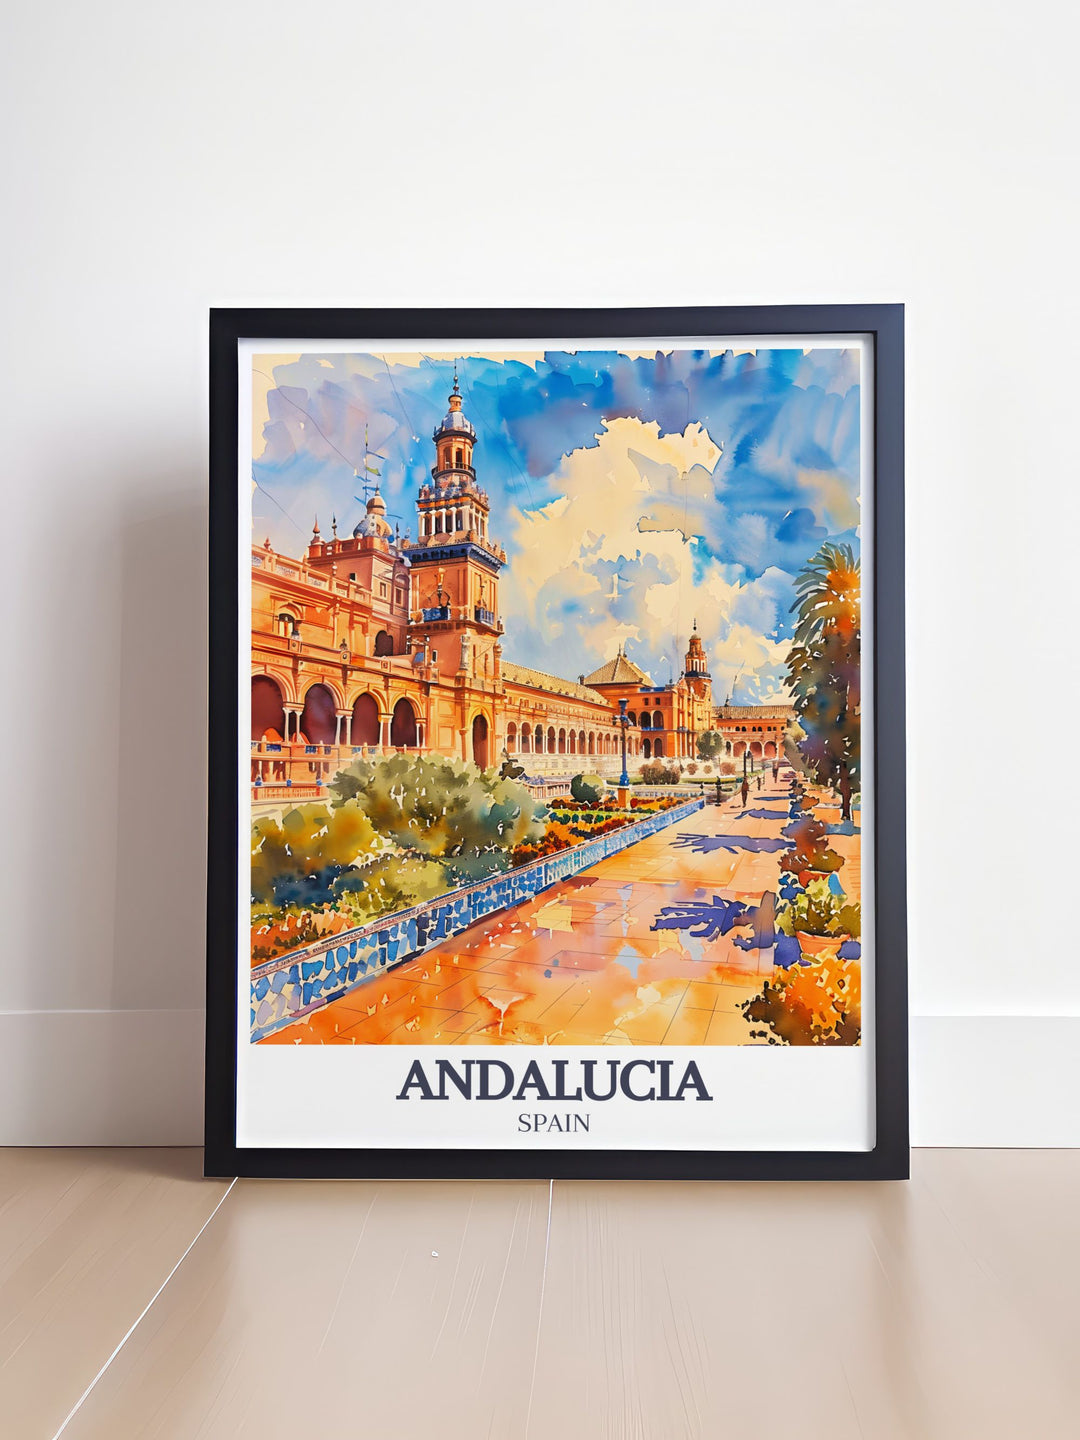 Featuring the Alcazar of Seville, this art print highlights the magnificent Ambassadors Hall with its rich Mudejar architecture, making it an ideal piece for history lovers and art enthusiasts.